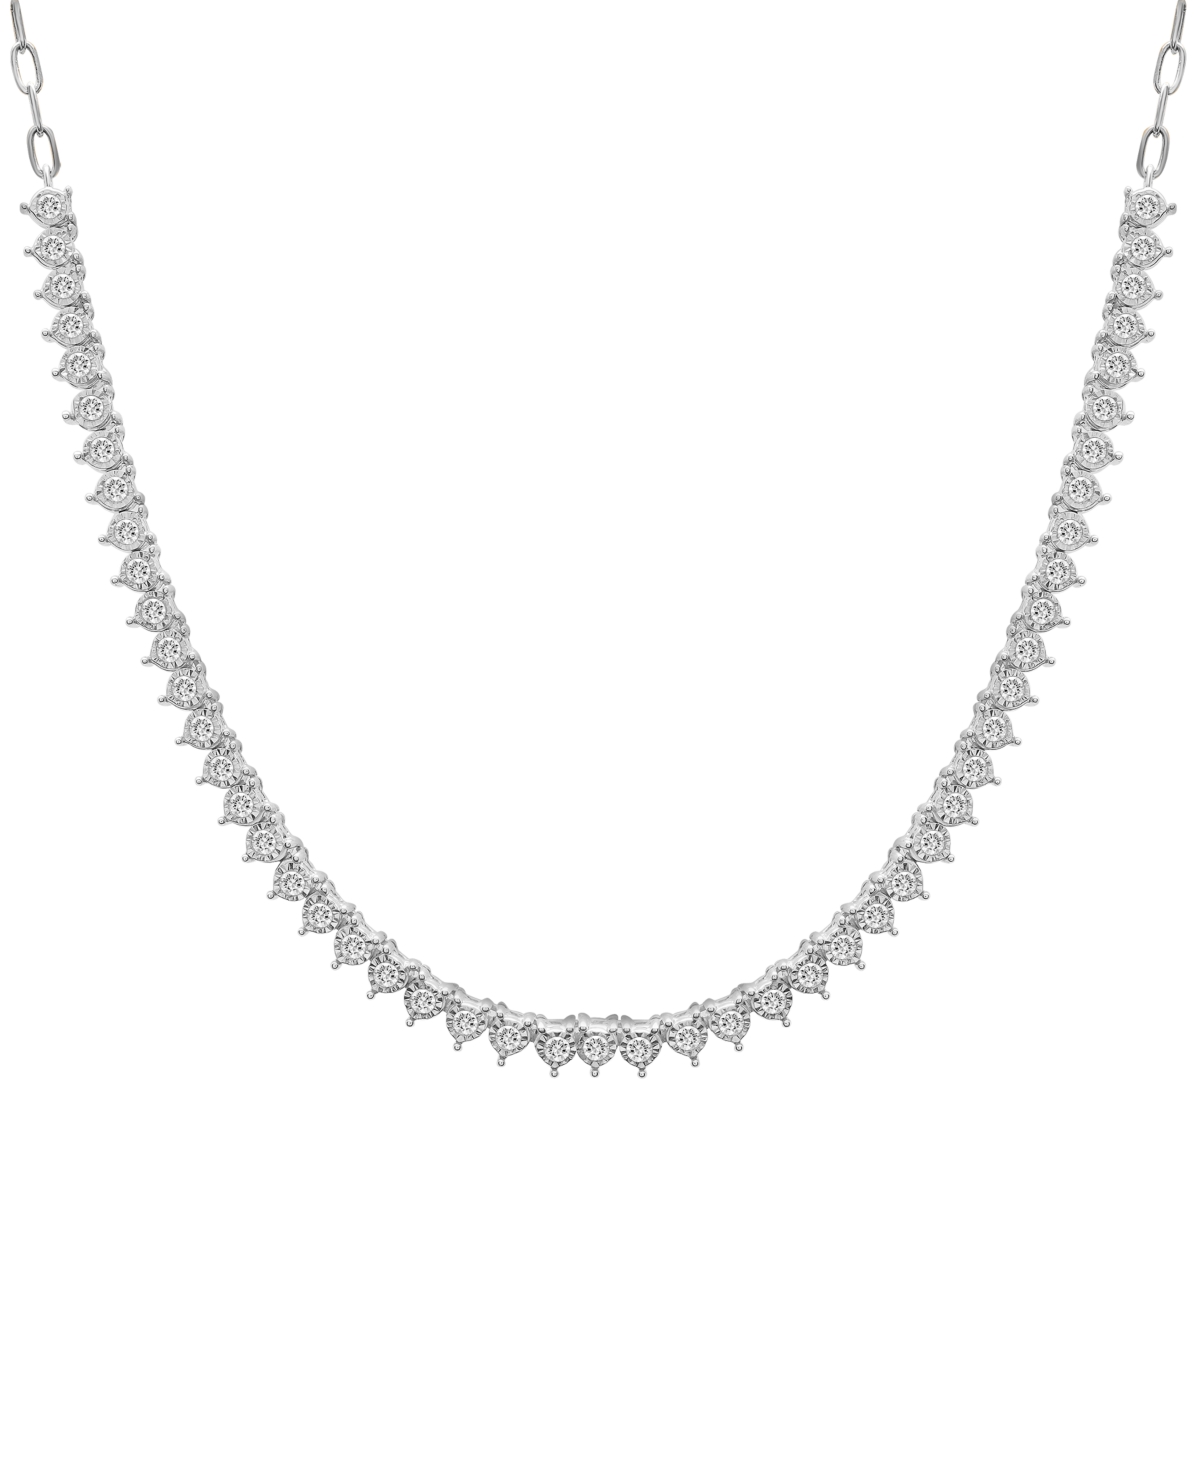 Diamond 16" Collar Necklace (1 ct. t.w.), Created for Macy's - Gold-Plated Sterling Silver